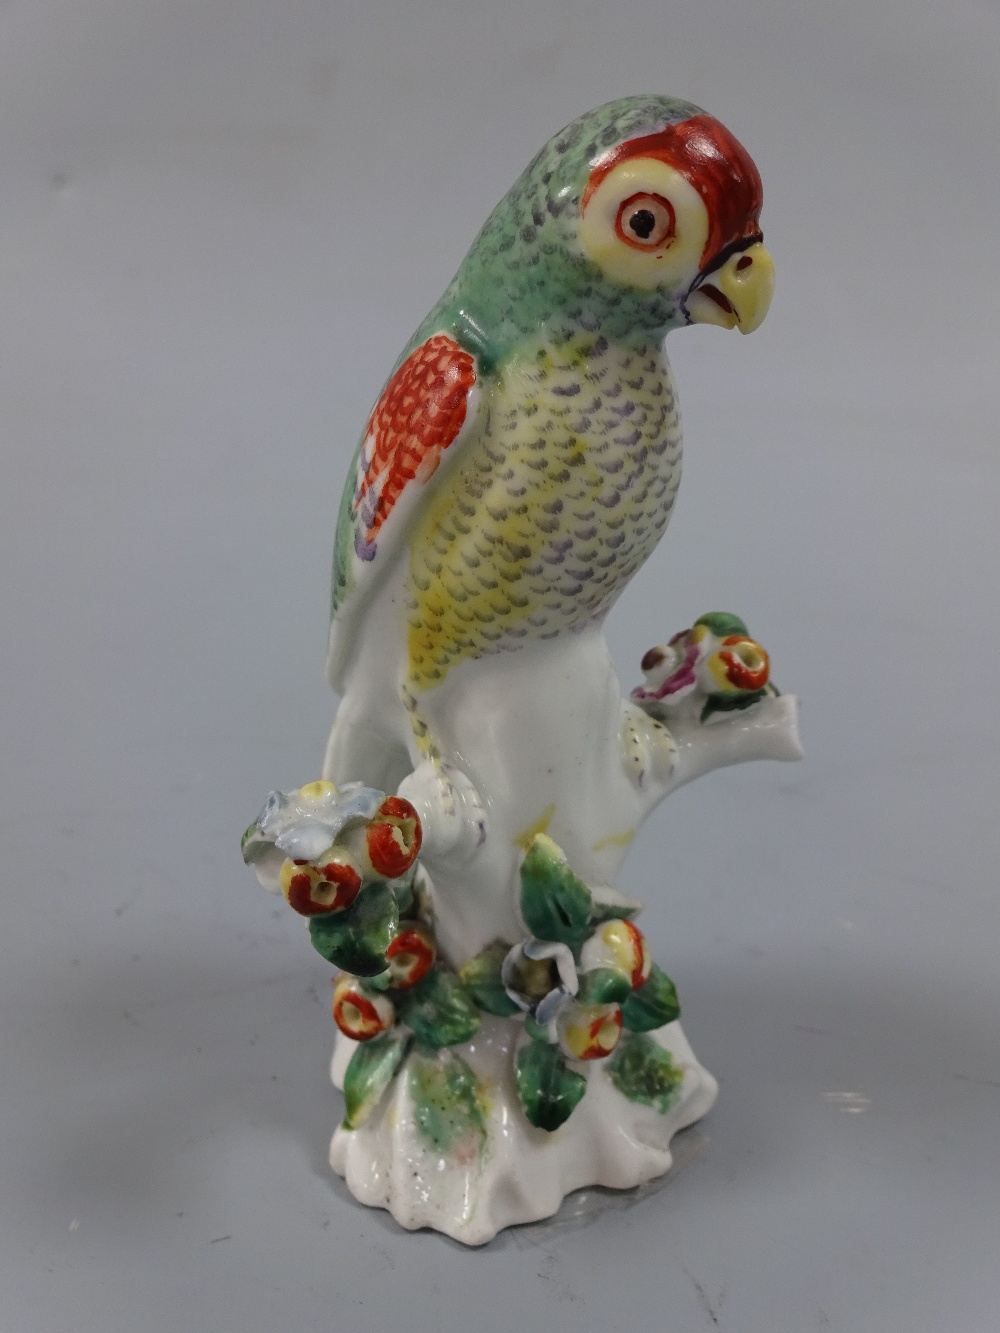 A DERBY PARAKEET FIGURE, c.1765, on floral encrusted branch, approximately 9.5cm high (a/f) (D.